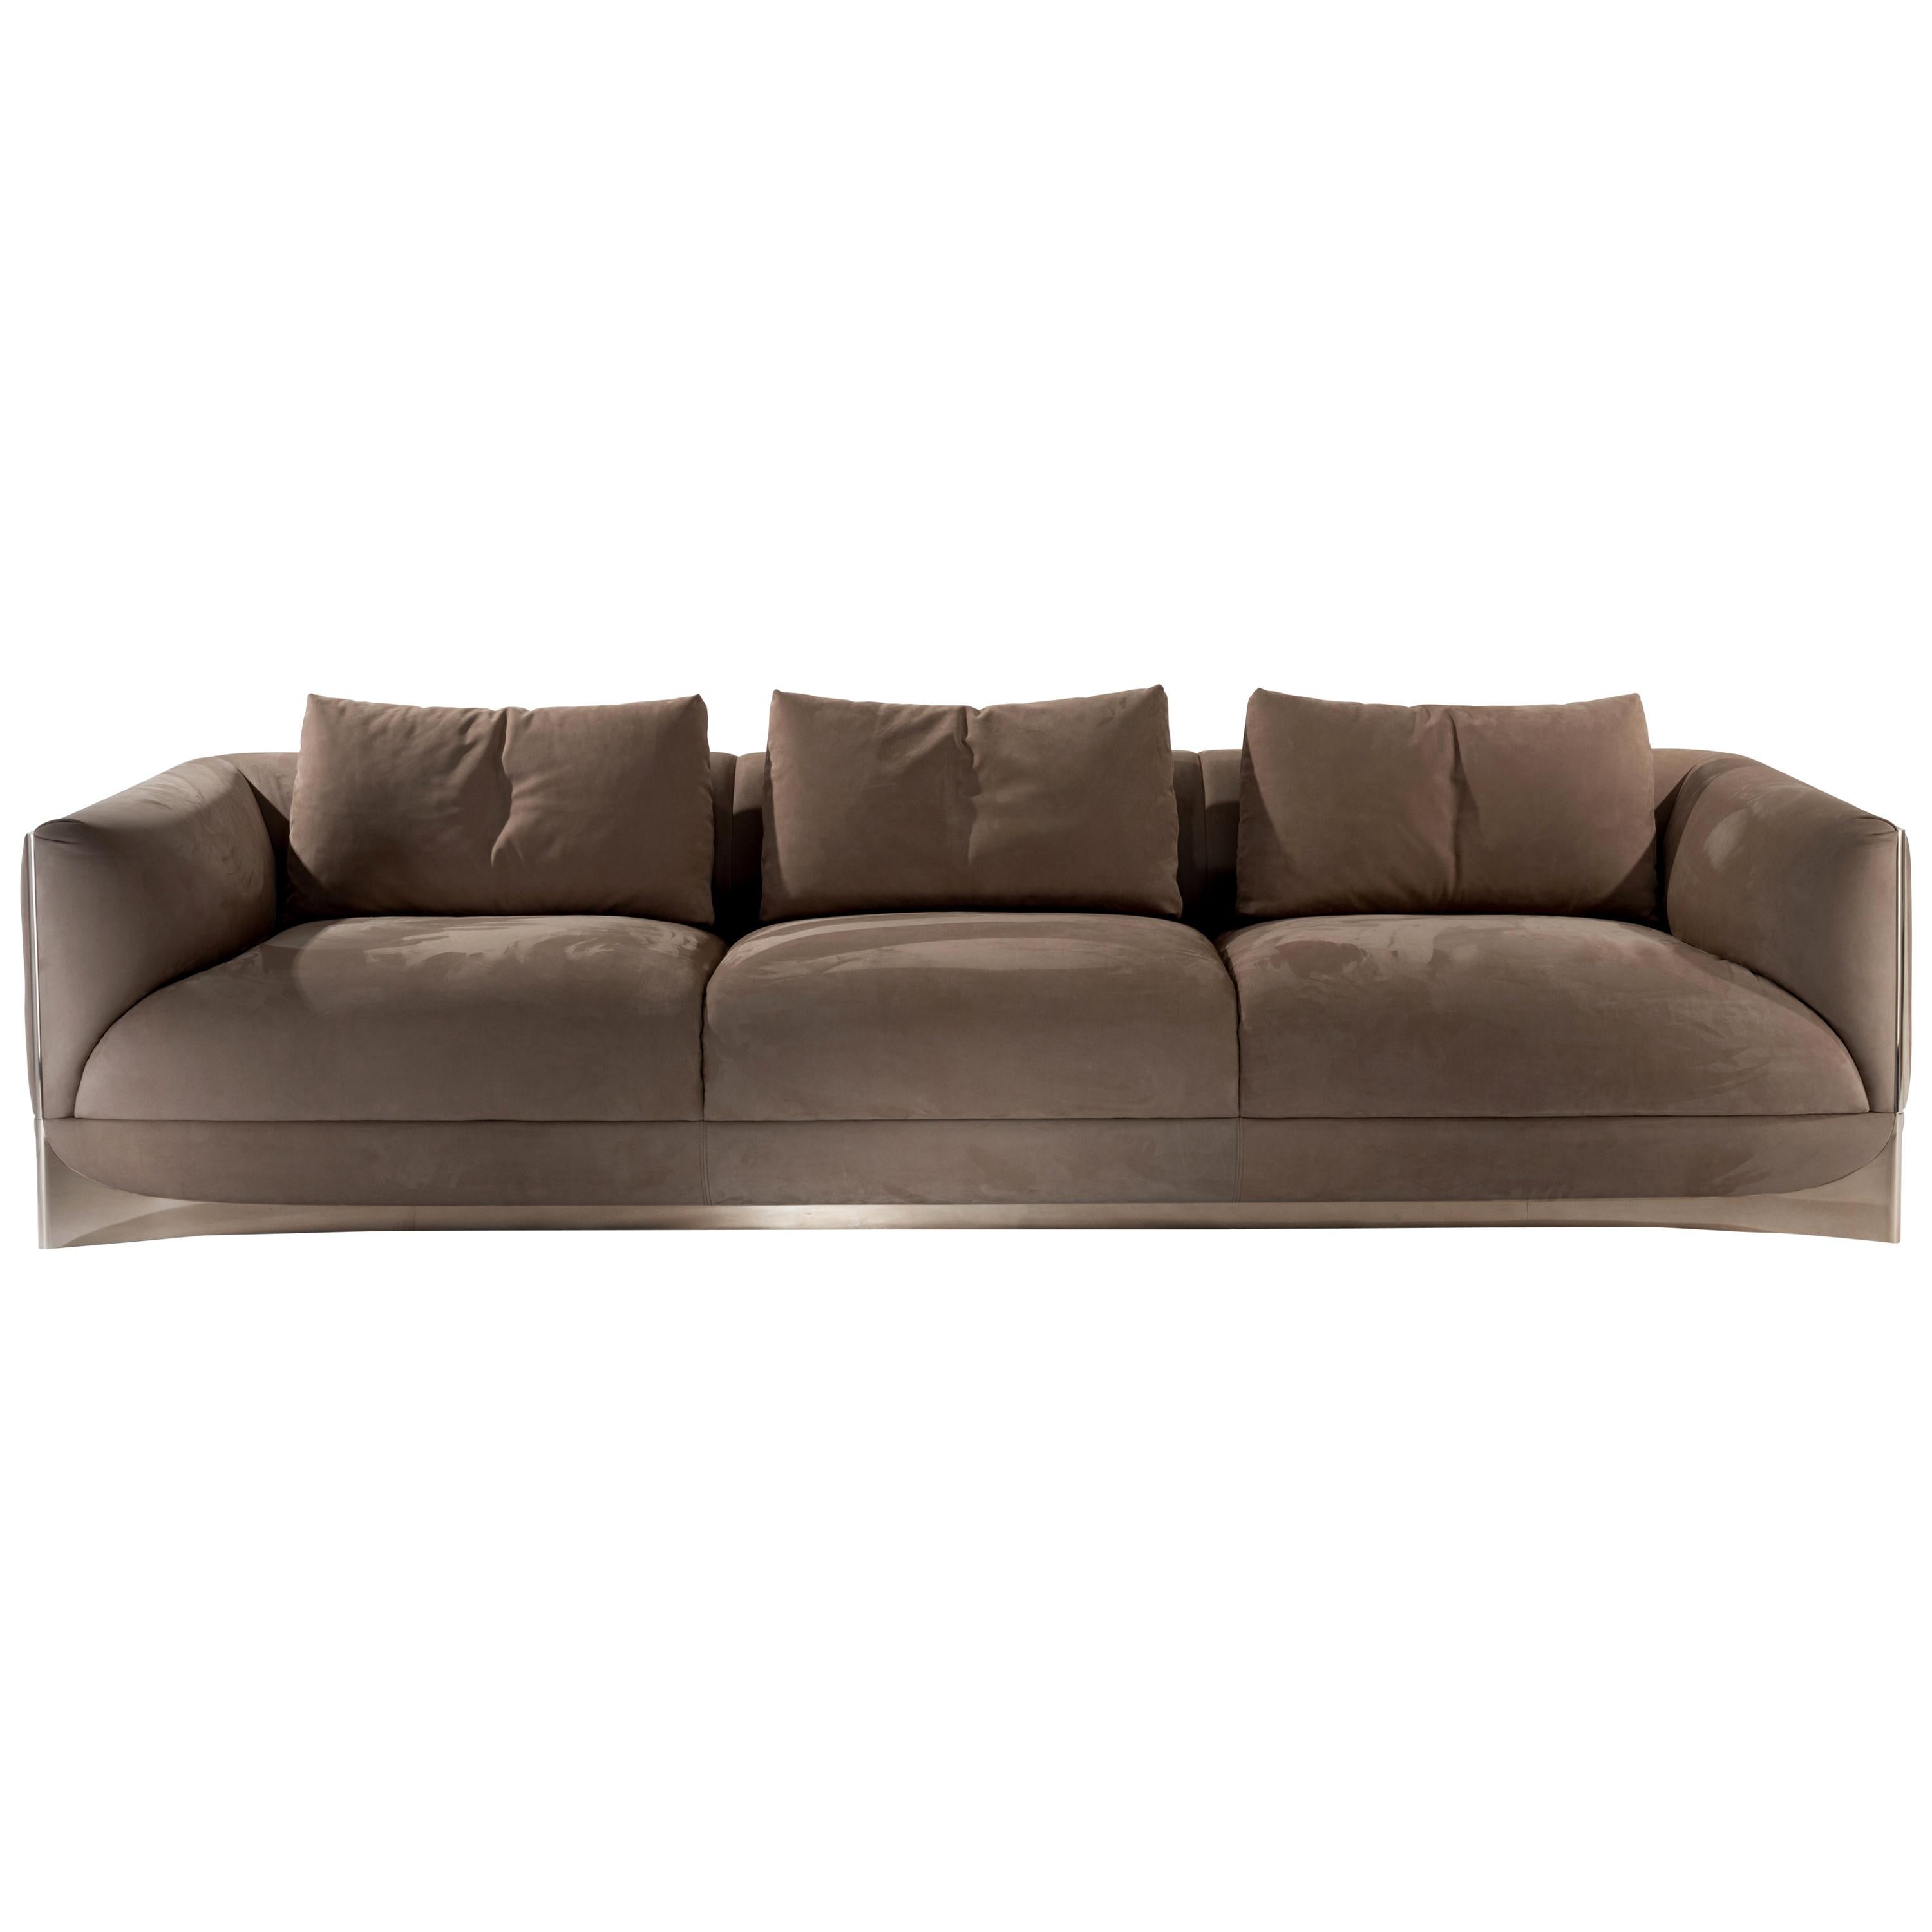 Visionnaire Cà Foscari Sofa with Fabric or Leather by Alessandro La Spada For Sale